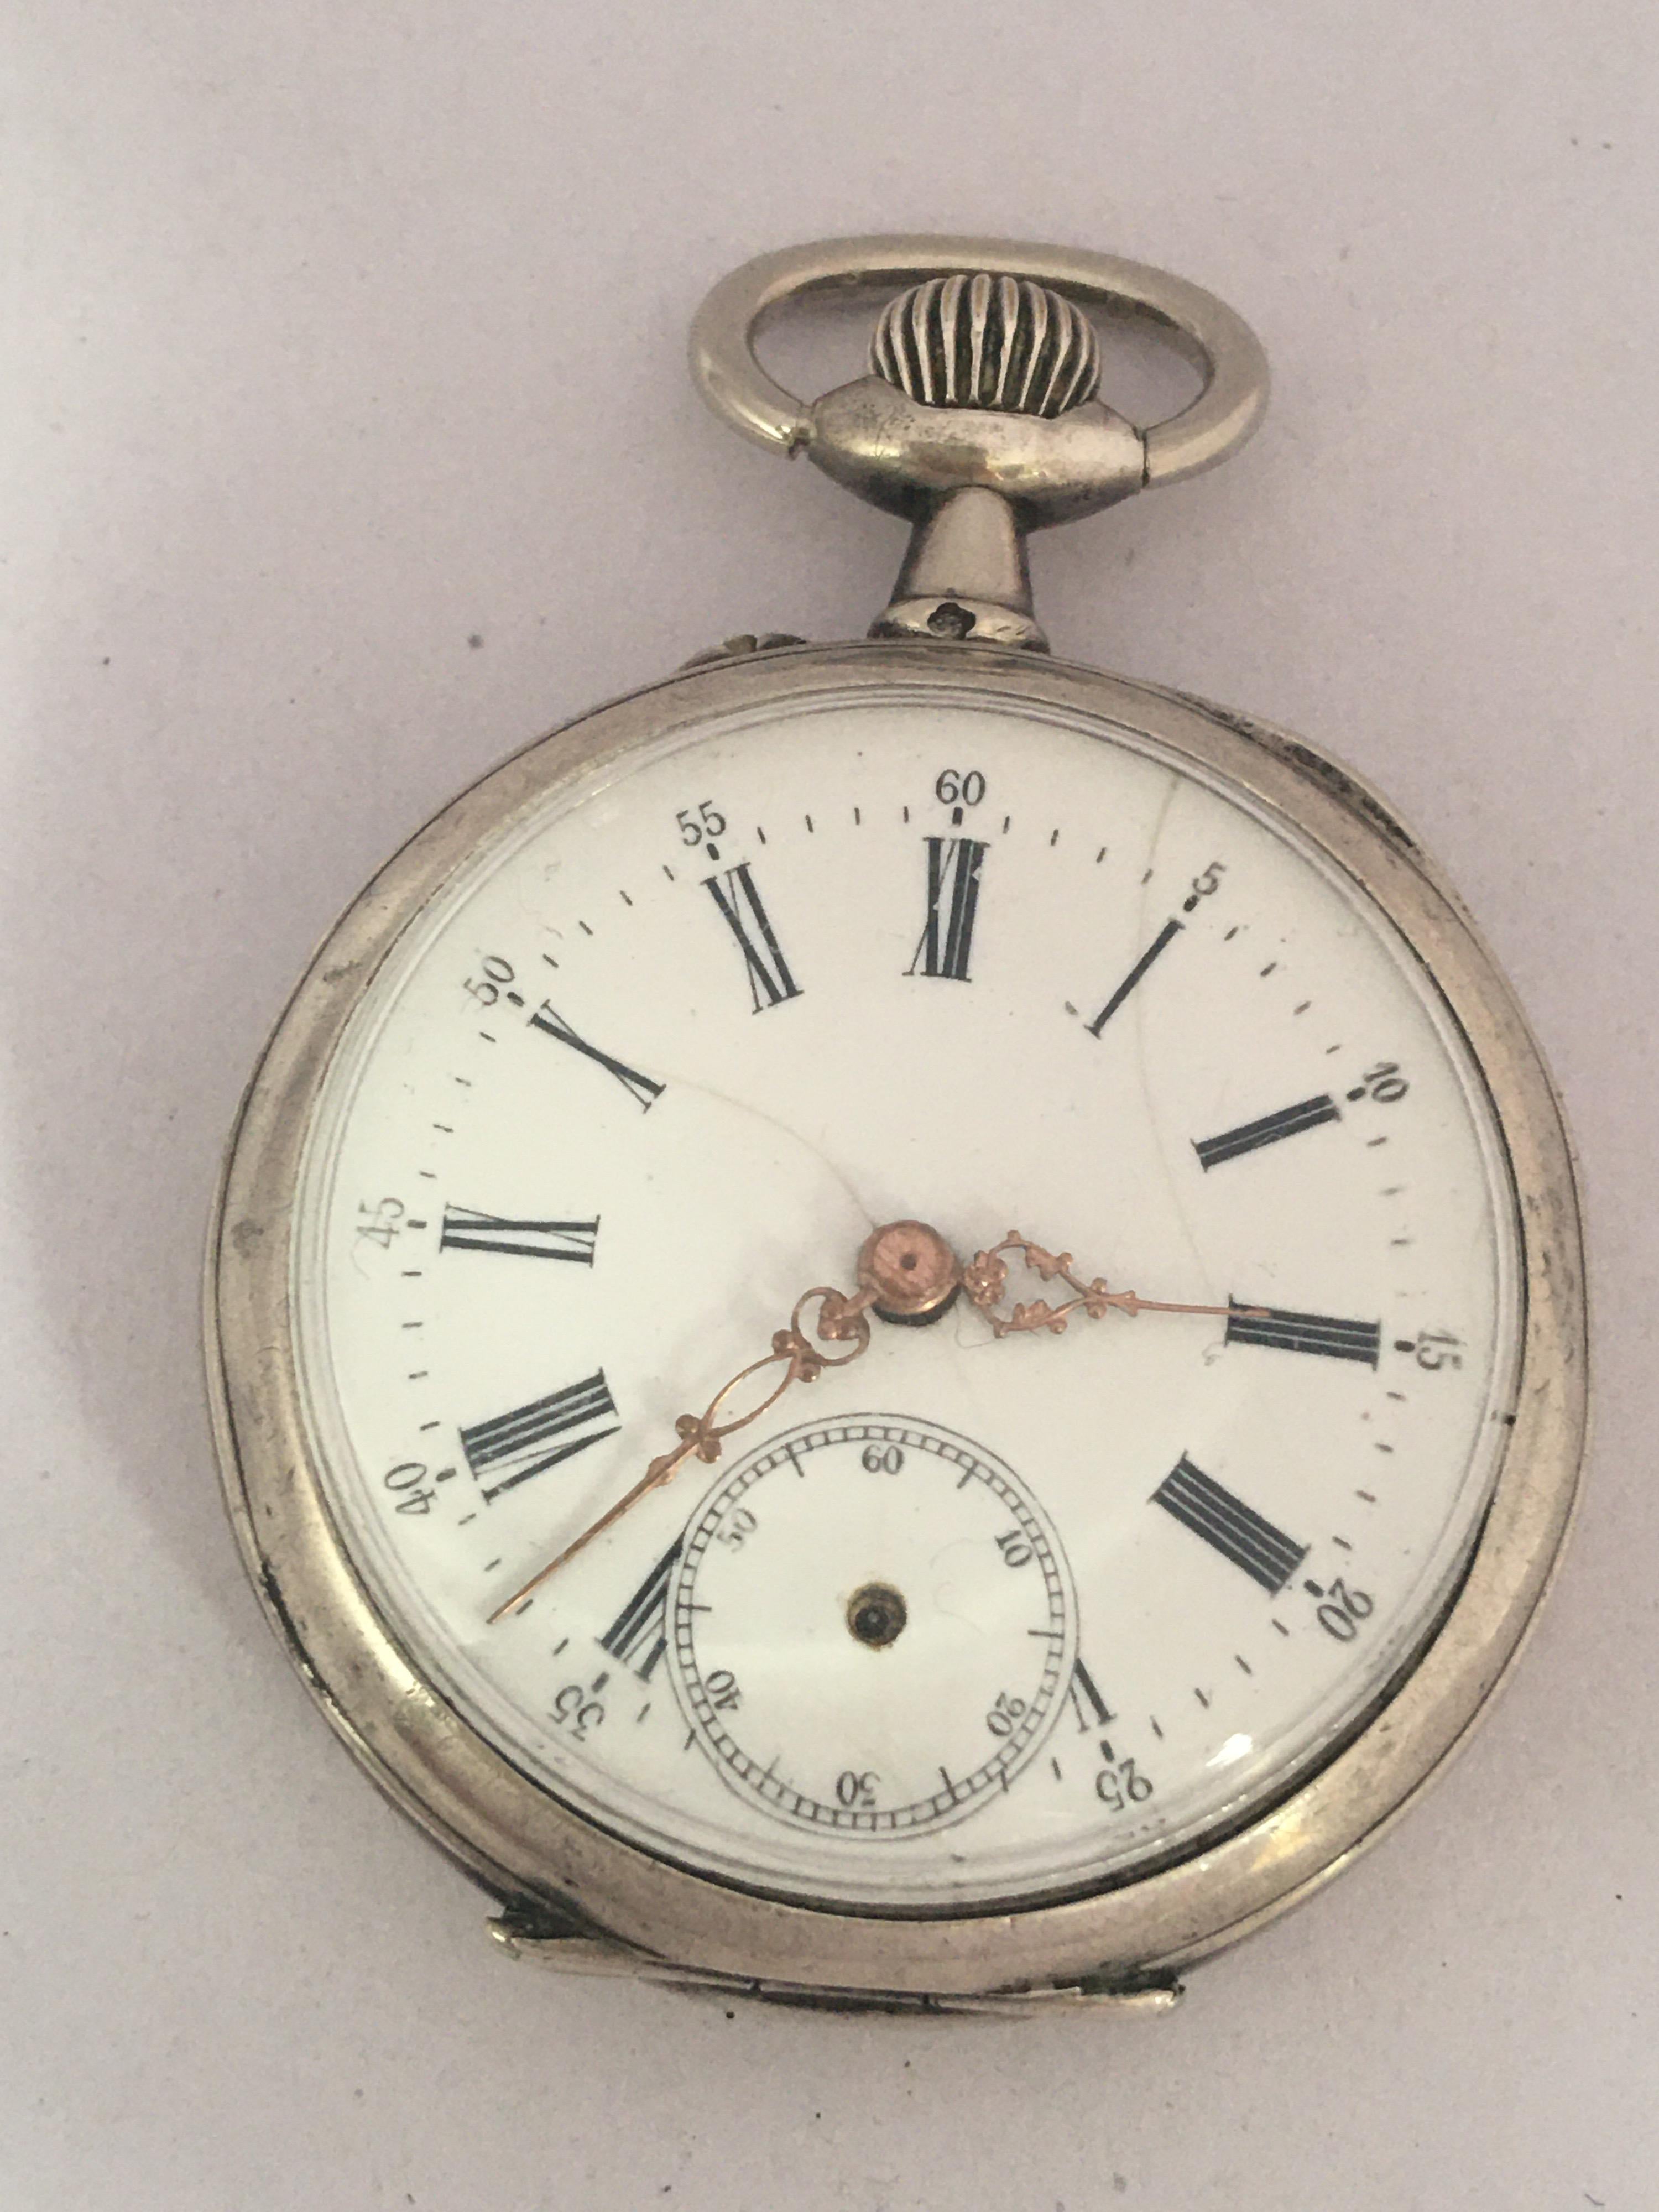 This beautiful antique 40mm diameter hand winding silver pocket watch is in good working condition and it is running well. Visible signs of ageing and wear with some dents on the side case and small light marks on the glass and on the case as shown.